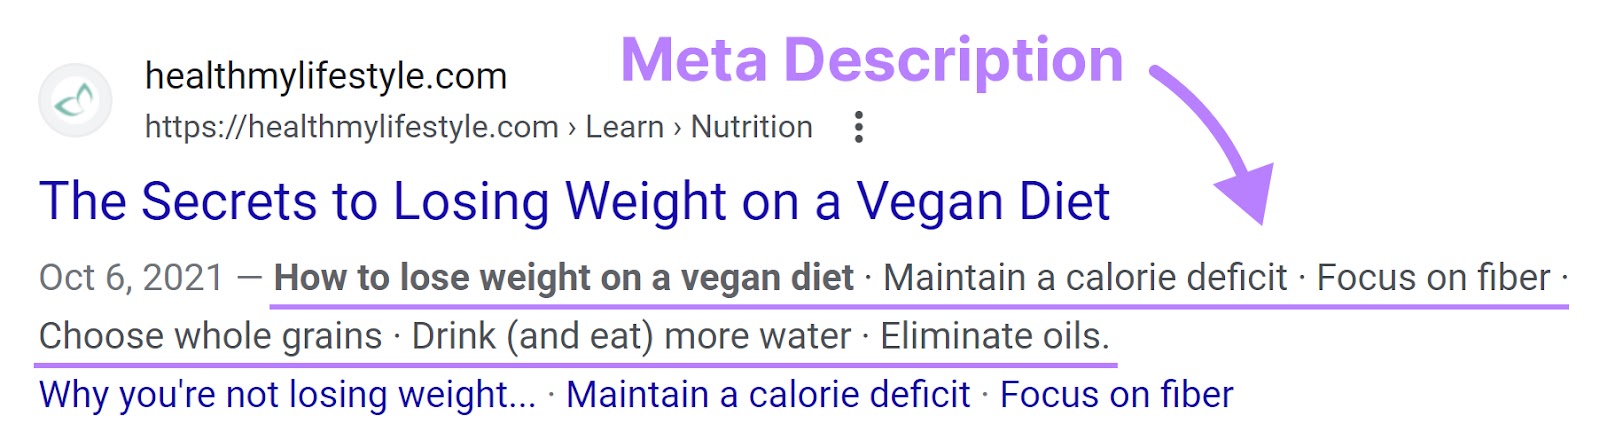 Meta description under "The Secrets to Losing Weight on a Vegan Diet" title tag on Google SERP